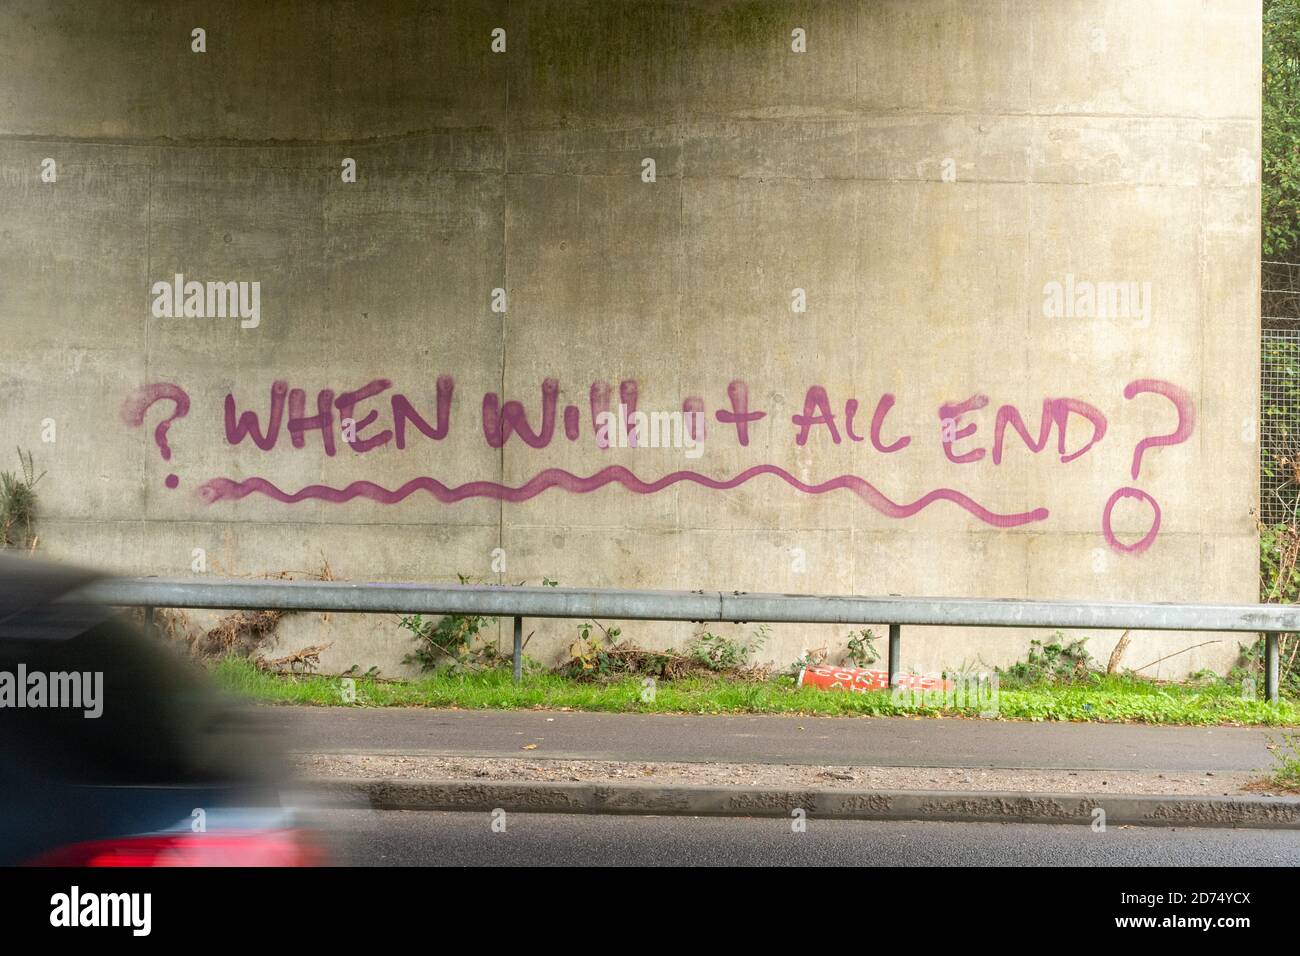 Graffiti asking When Will it all End? painted under a bridge in reference to the coronavirus covid-19 pandemic in 2020, UK Stock Photo